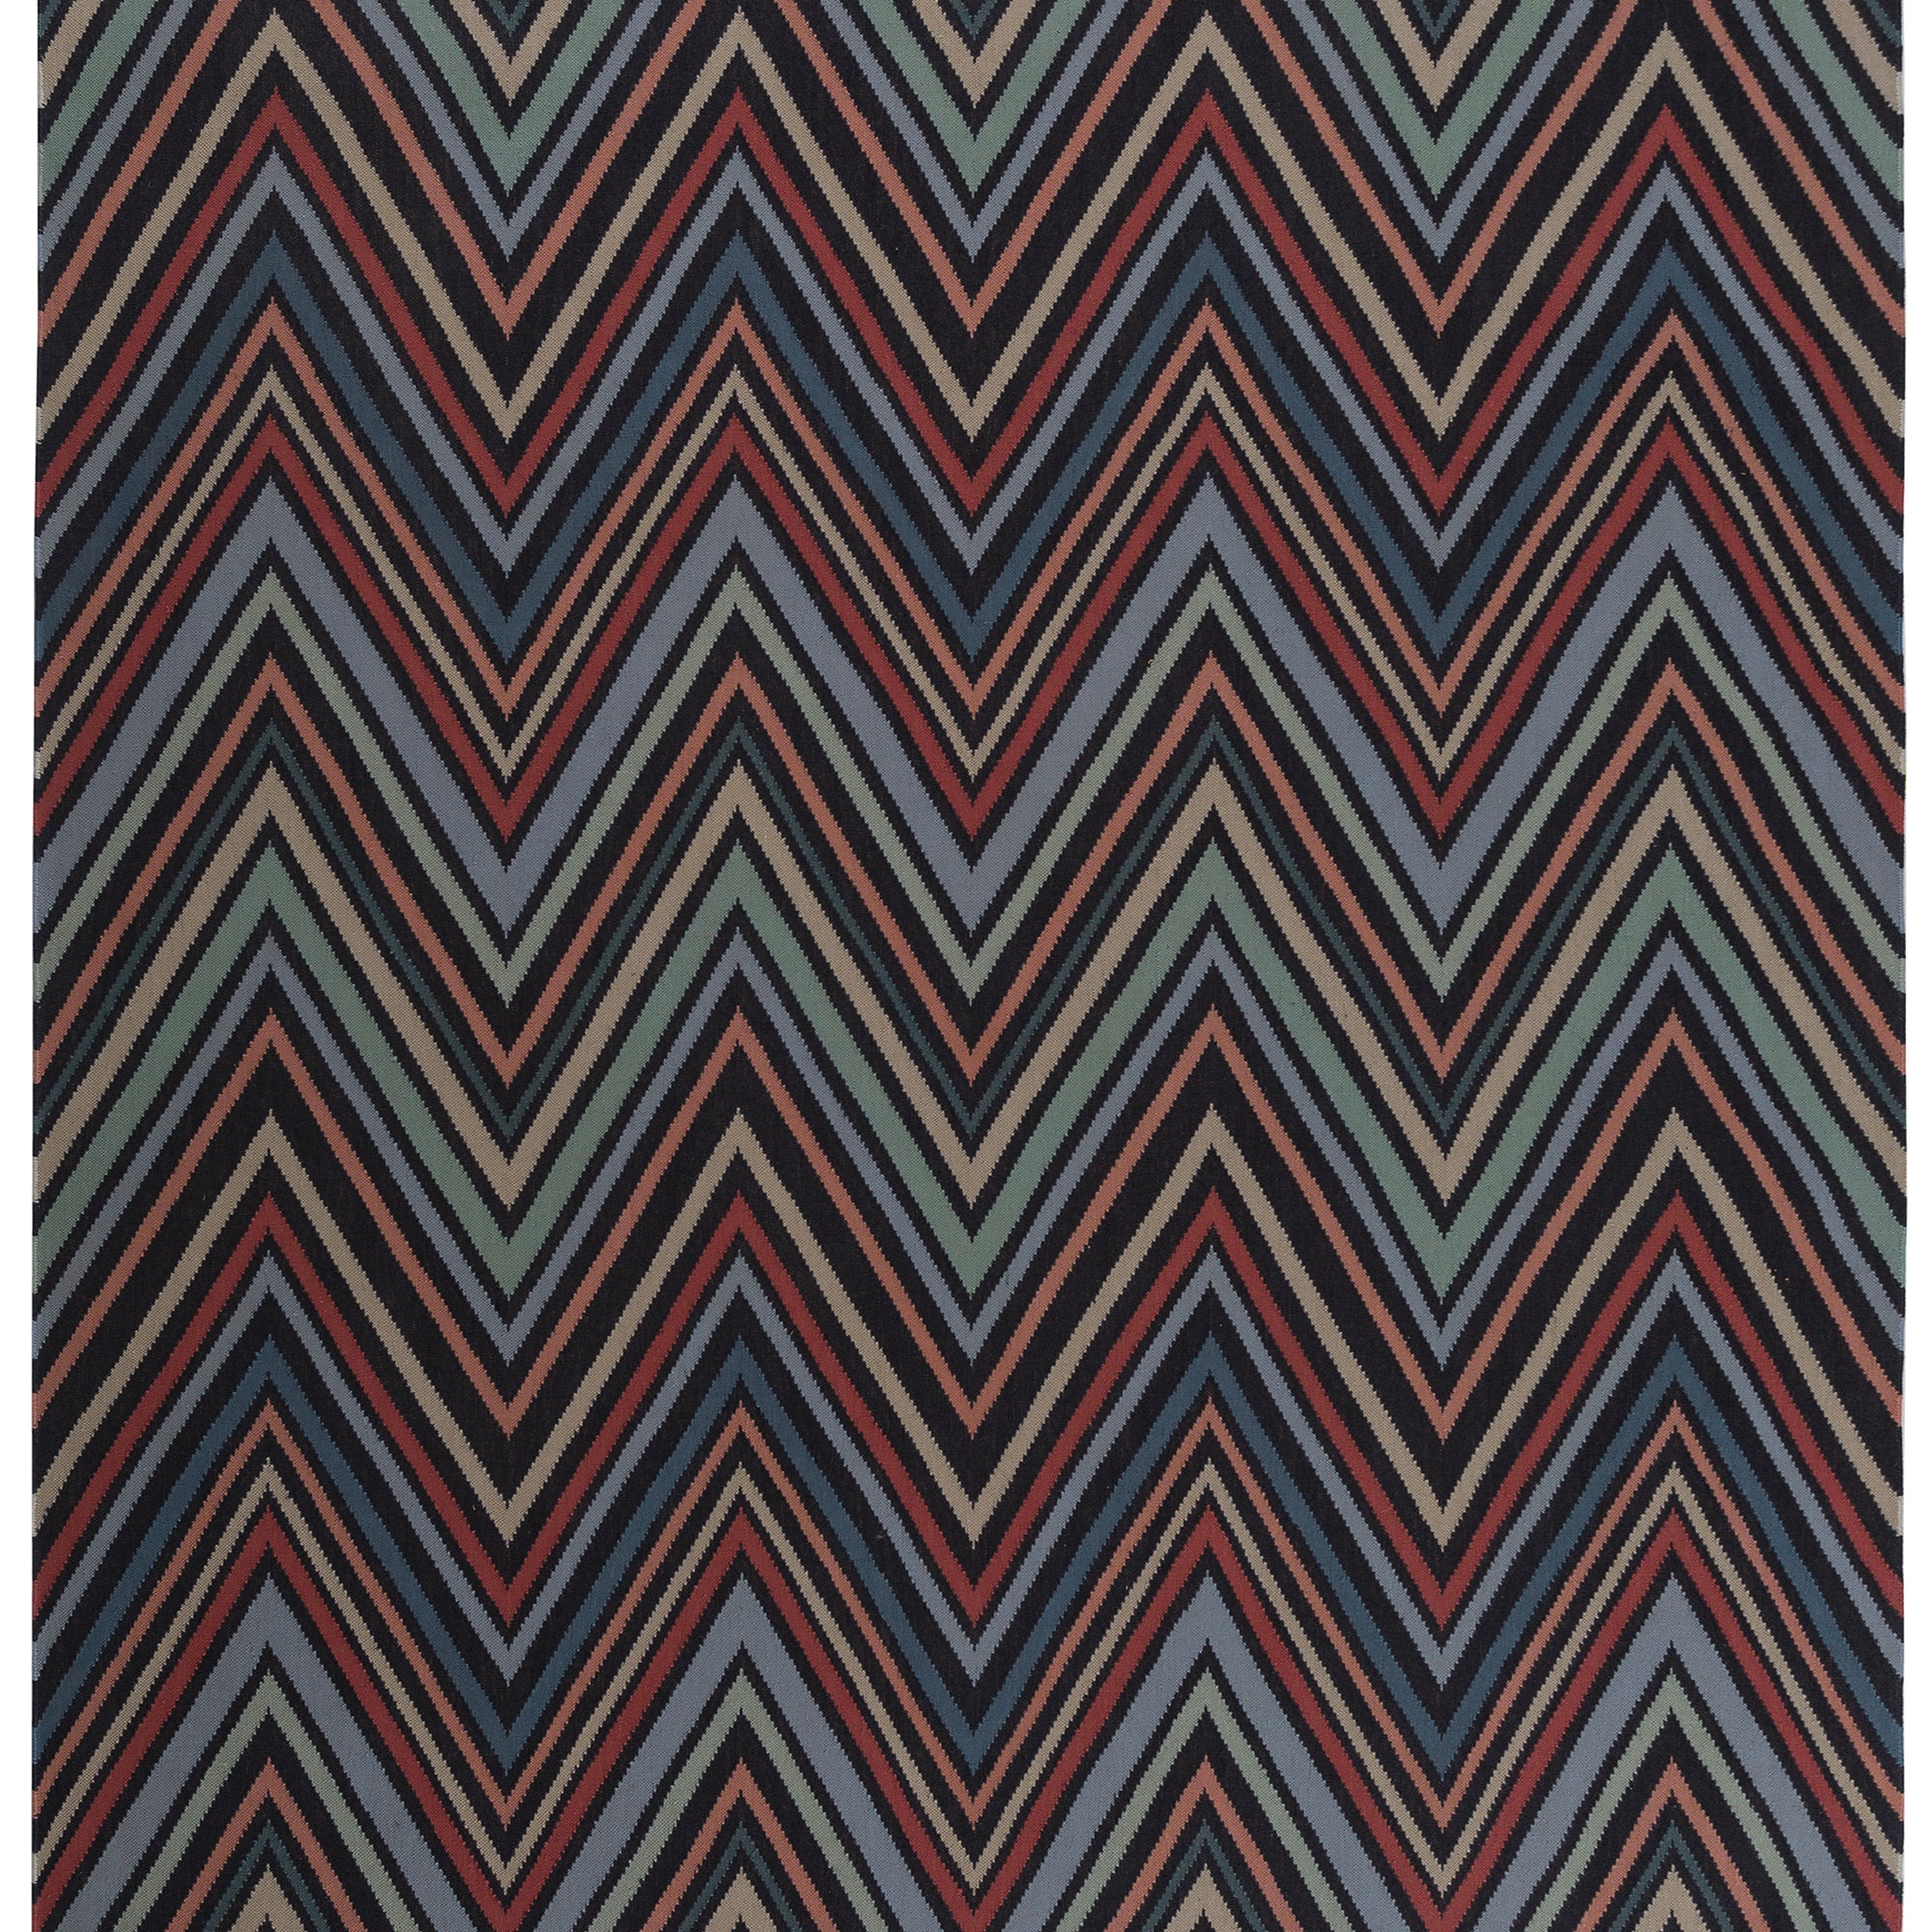 Full size To The Point Rug in Hessonite-Garnet-Slate, a zig zag pattern in red, blue coral with black, with a black fringed edge. 